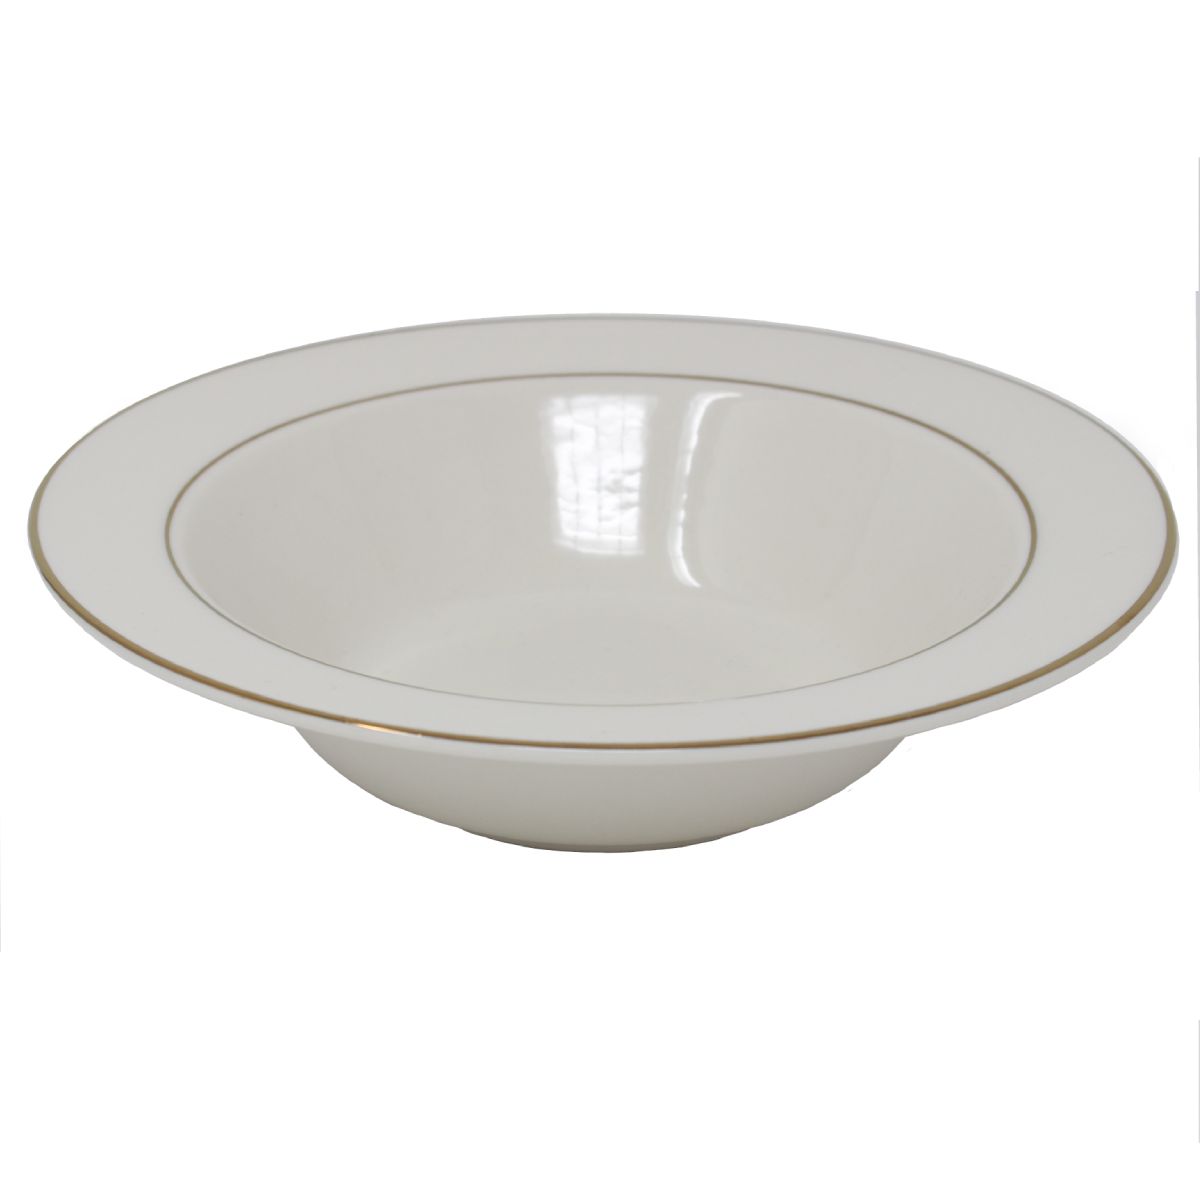 Serving Bowl Beige With Gold Band 20.5 Oz